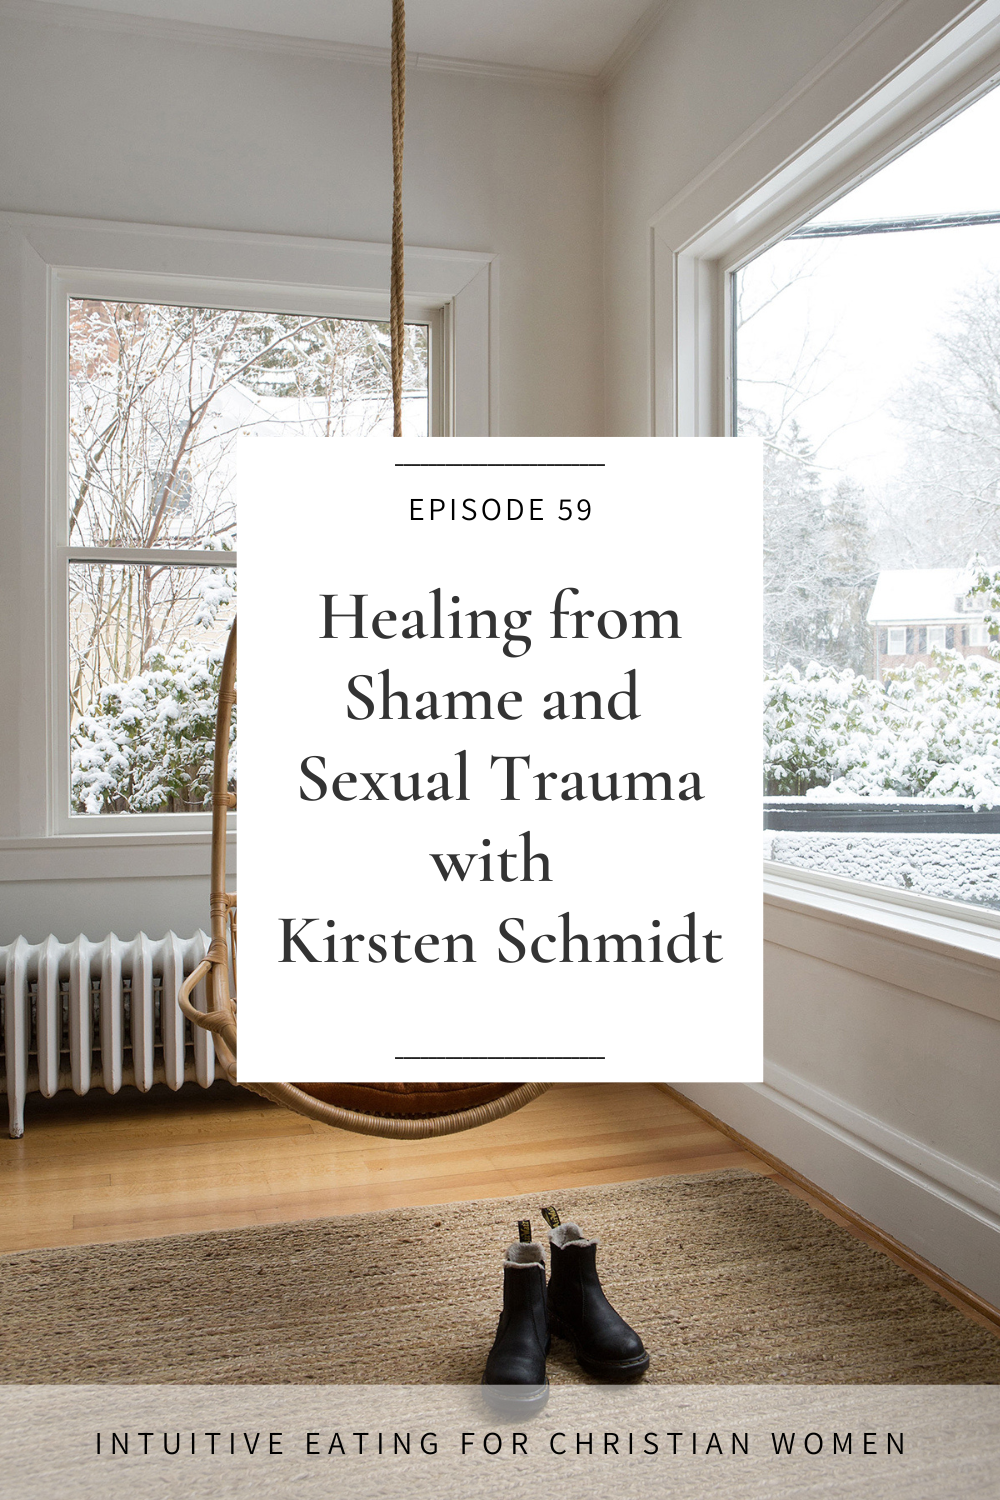 Healing from Shame and Sexual Trauma with Kirsten Schmidt on the Intuitive Eating for Christian Women Podcast